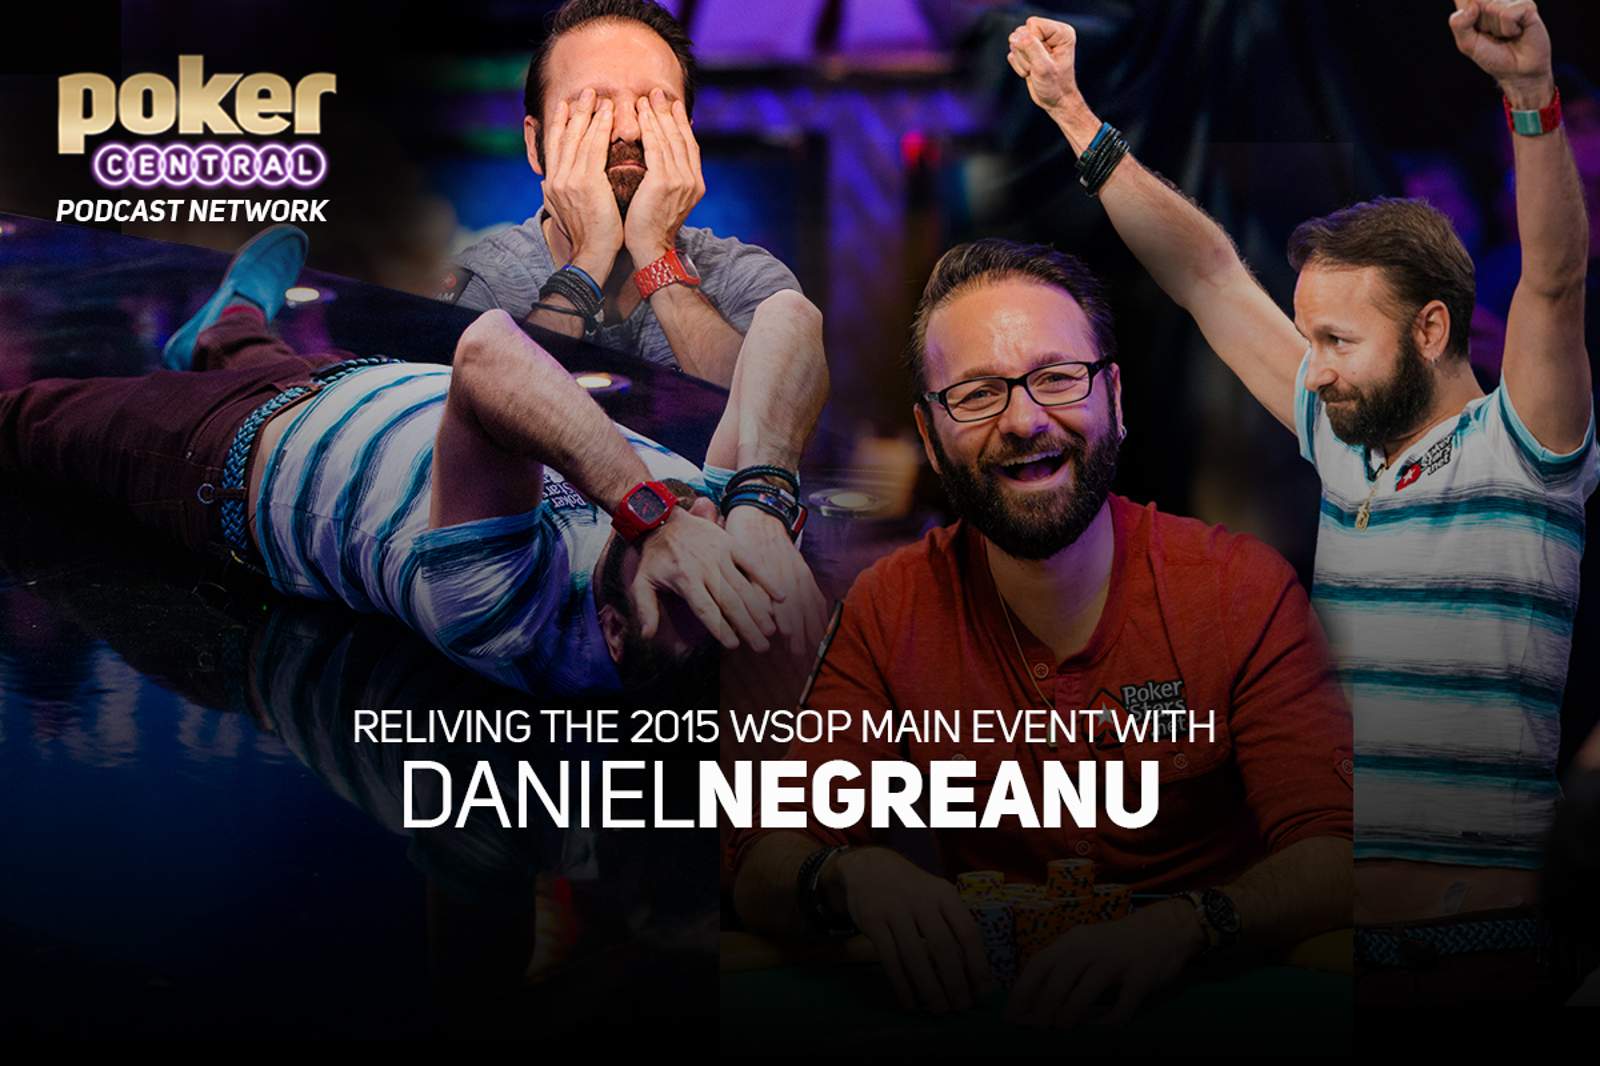 Reliving the 2015 WSOP Main Event with Daniel Negreanu